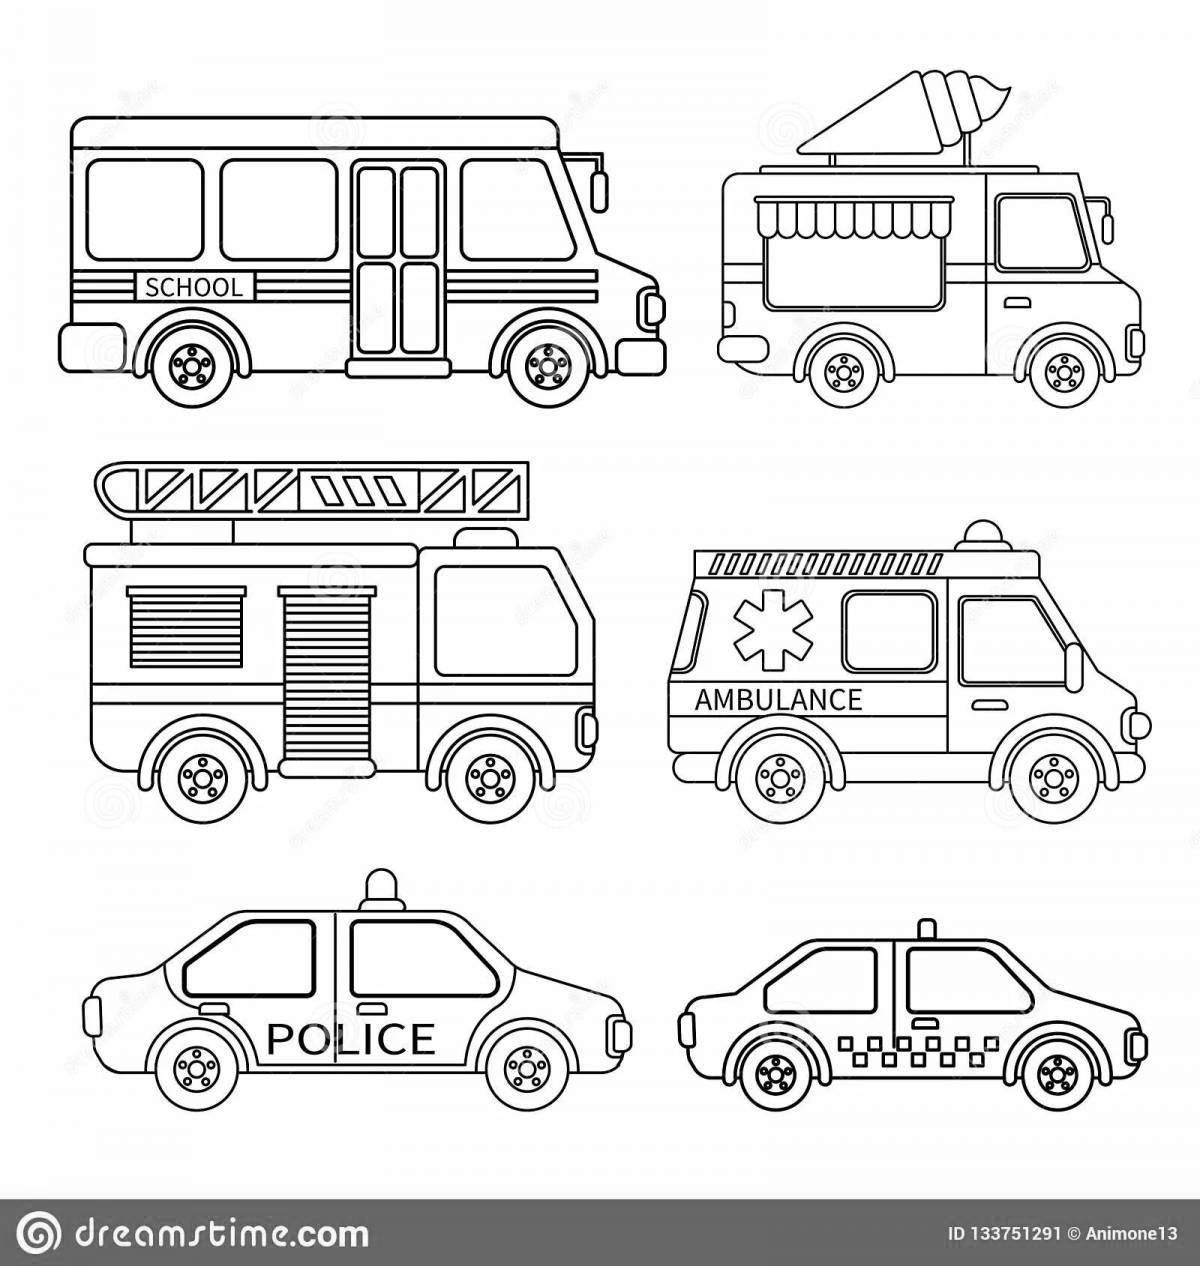 Beautiful coloring book for special vehicles